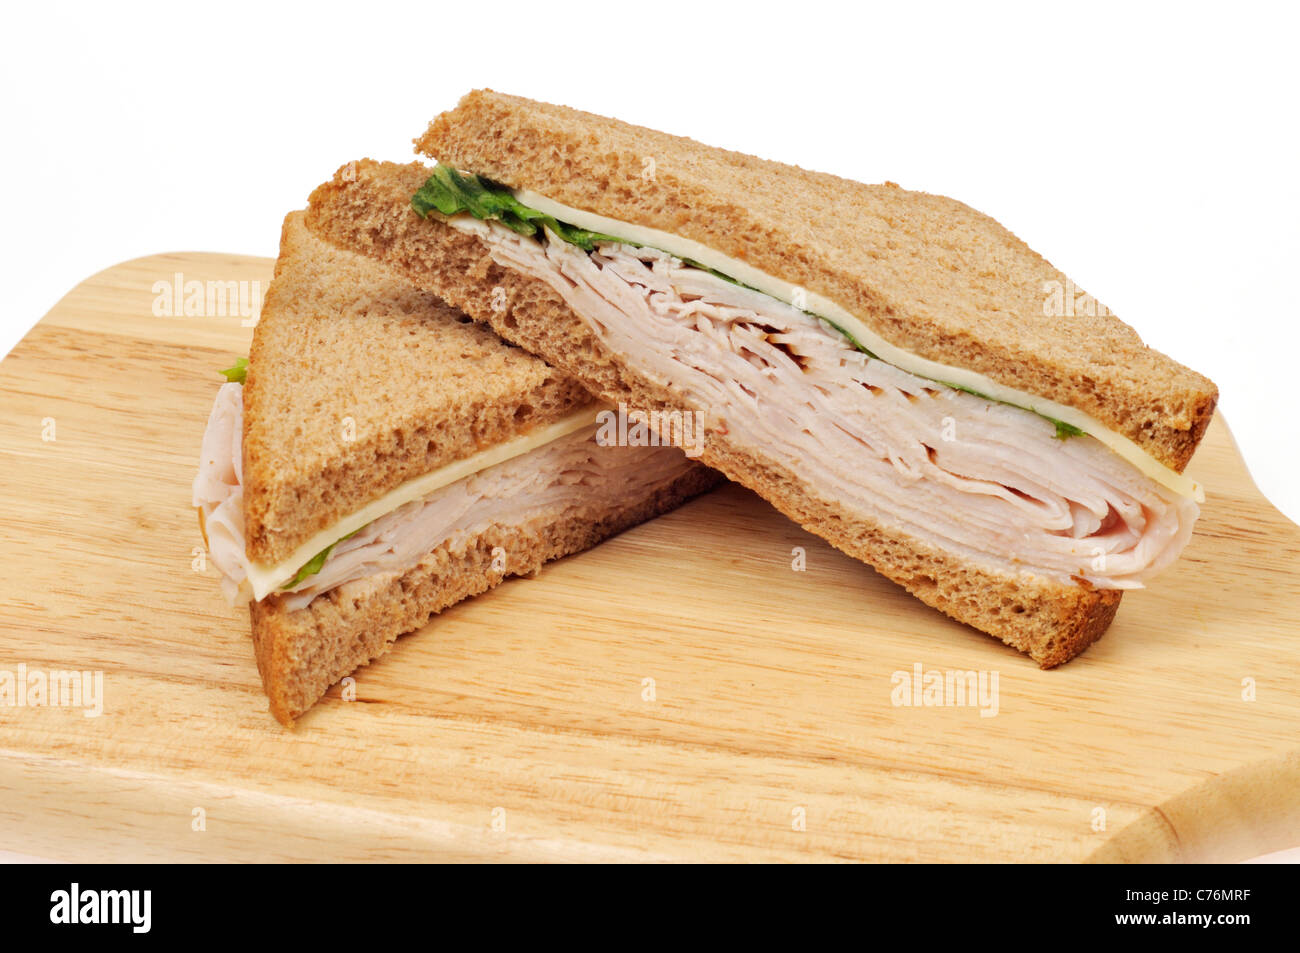 Turkey and cheese sandwich on whole meal bread cut in half on wood cutting board on white background. Stock Photo